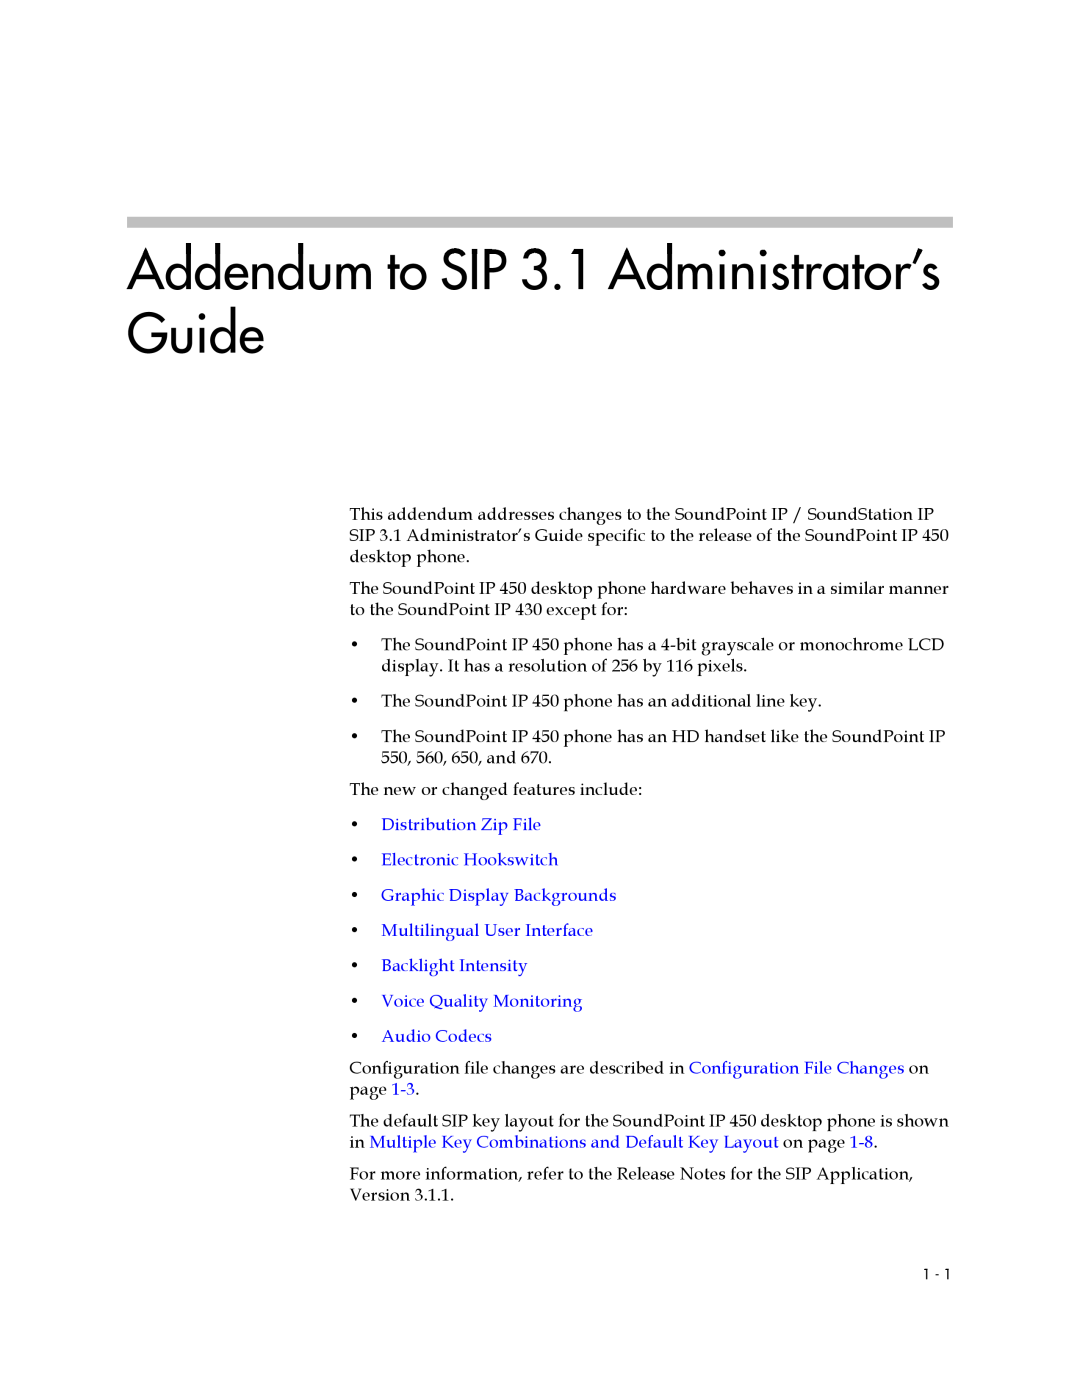 Polycom manual Addendum to SIP 3.1 Administrator’s Guide, Distribution Zip File Electronic Hookswitch 